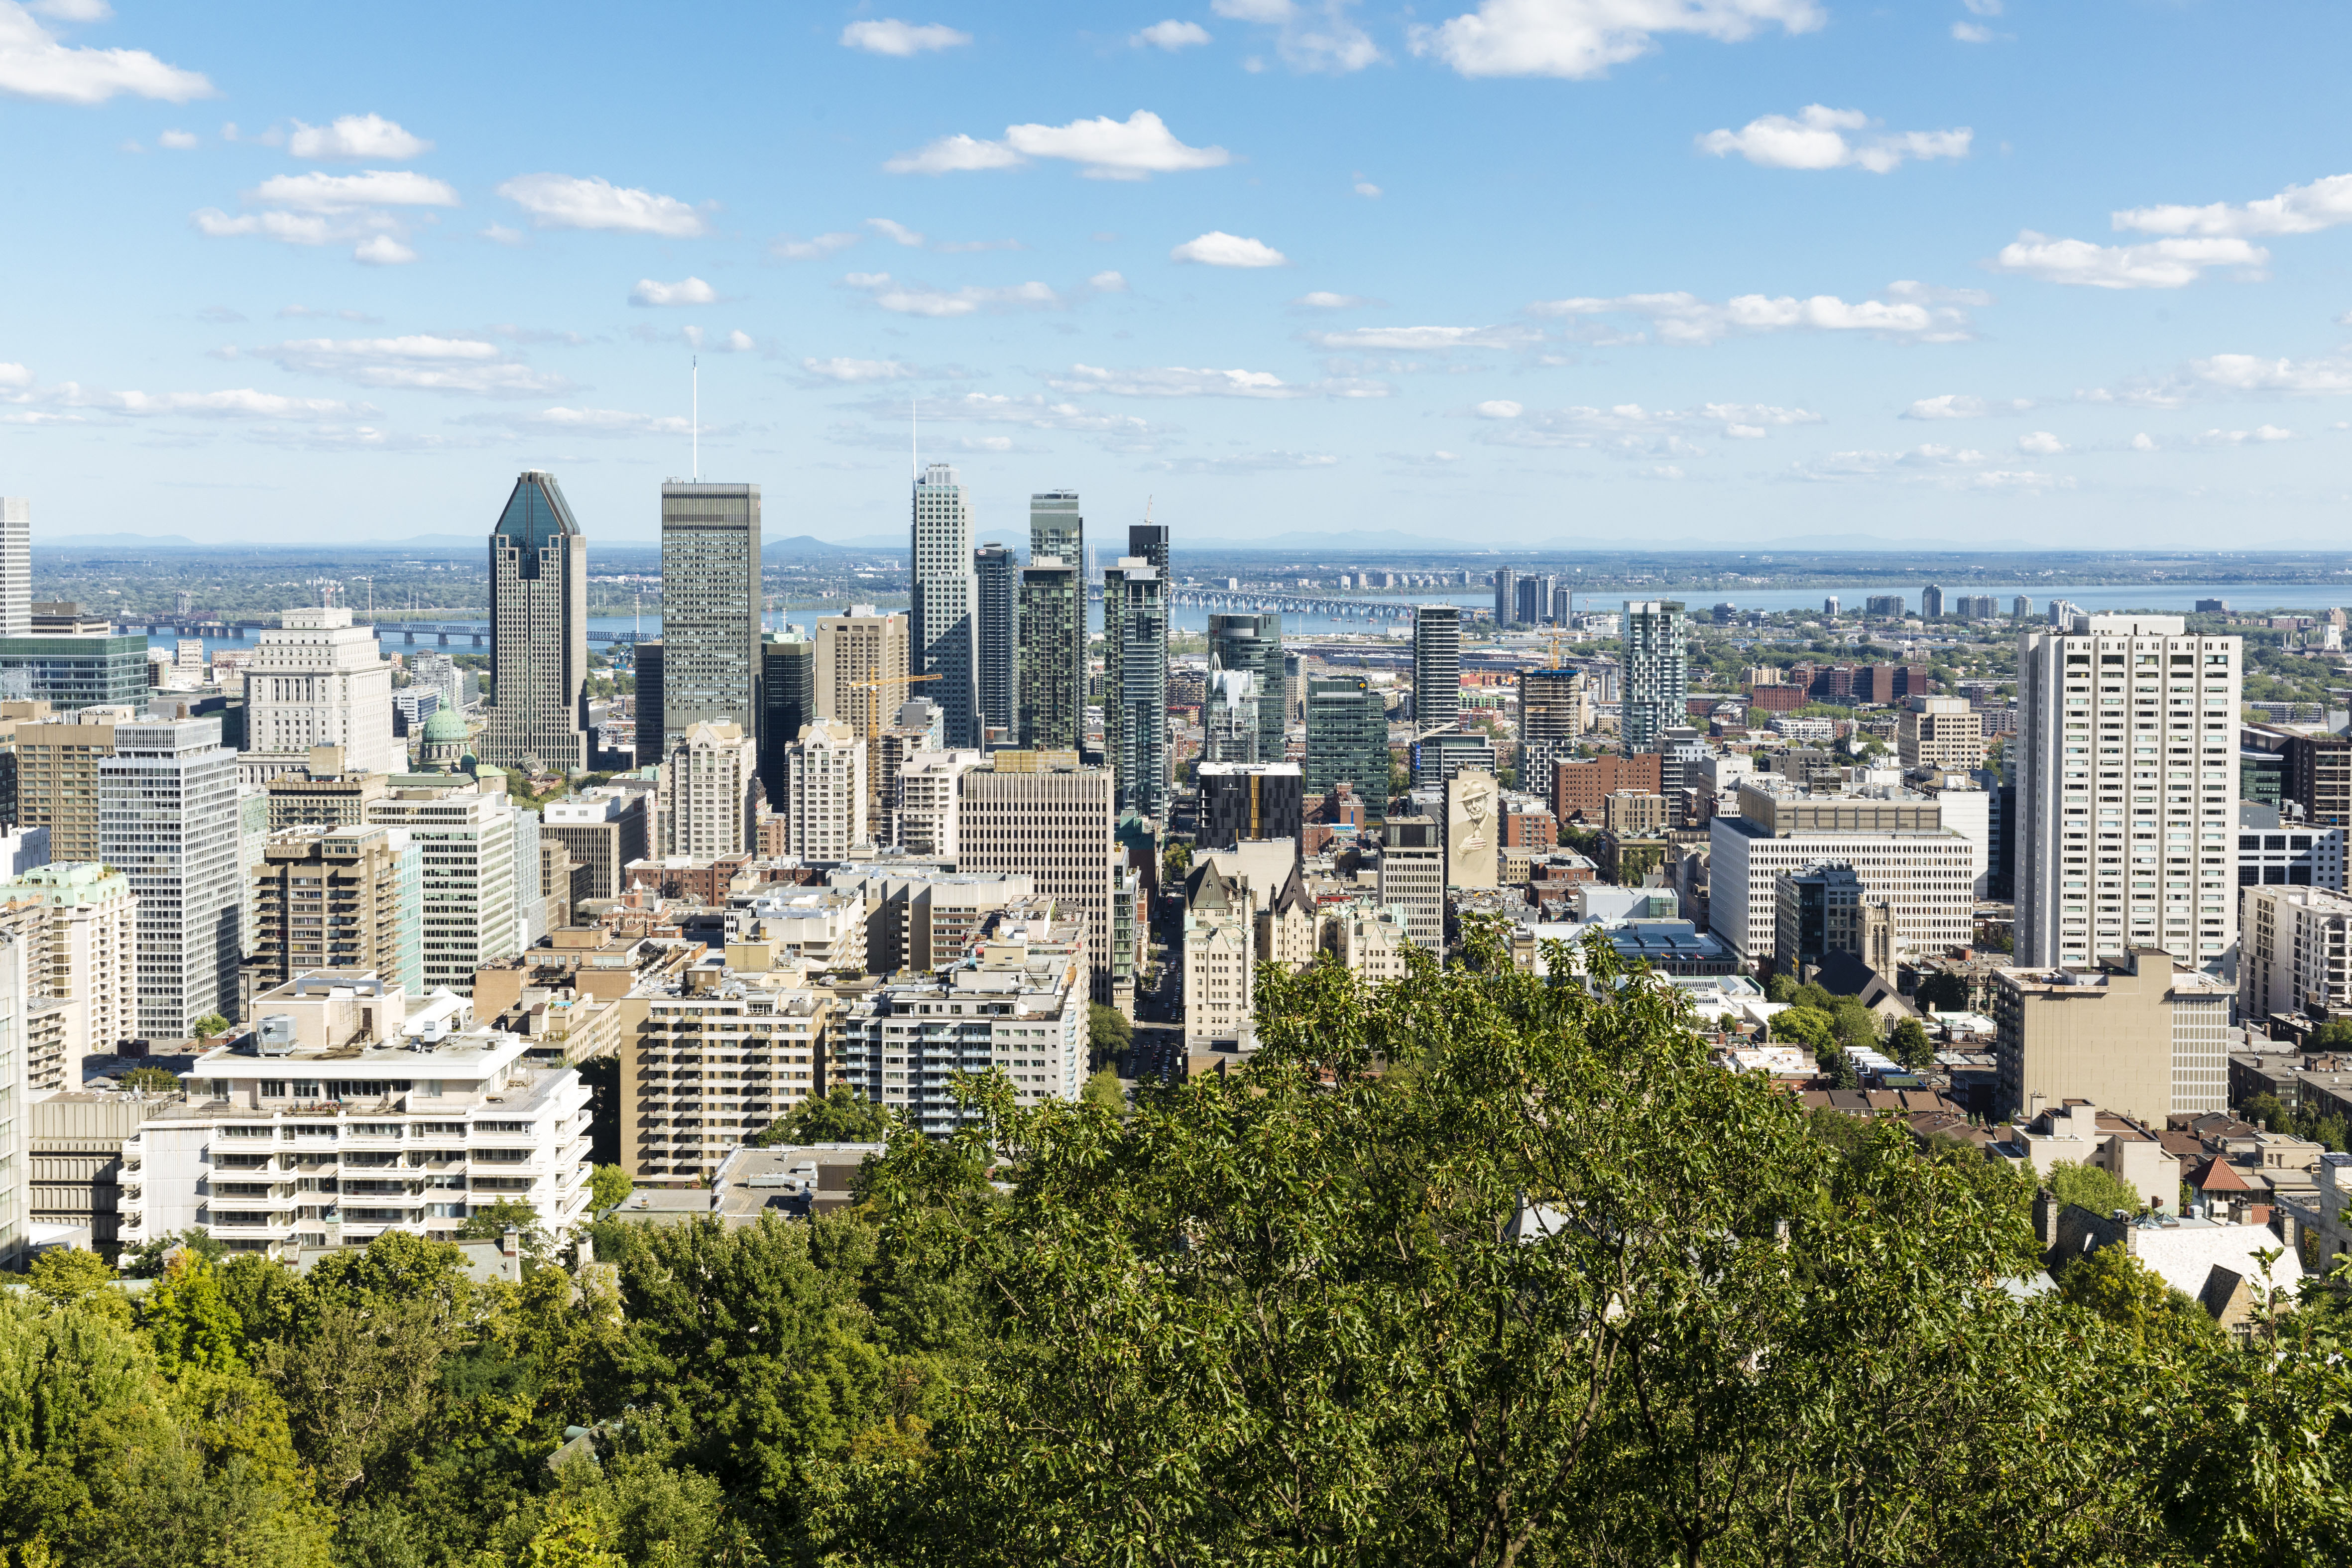 Panoramic view of the city of Montreal from Mount Royal, Quebec, Canada